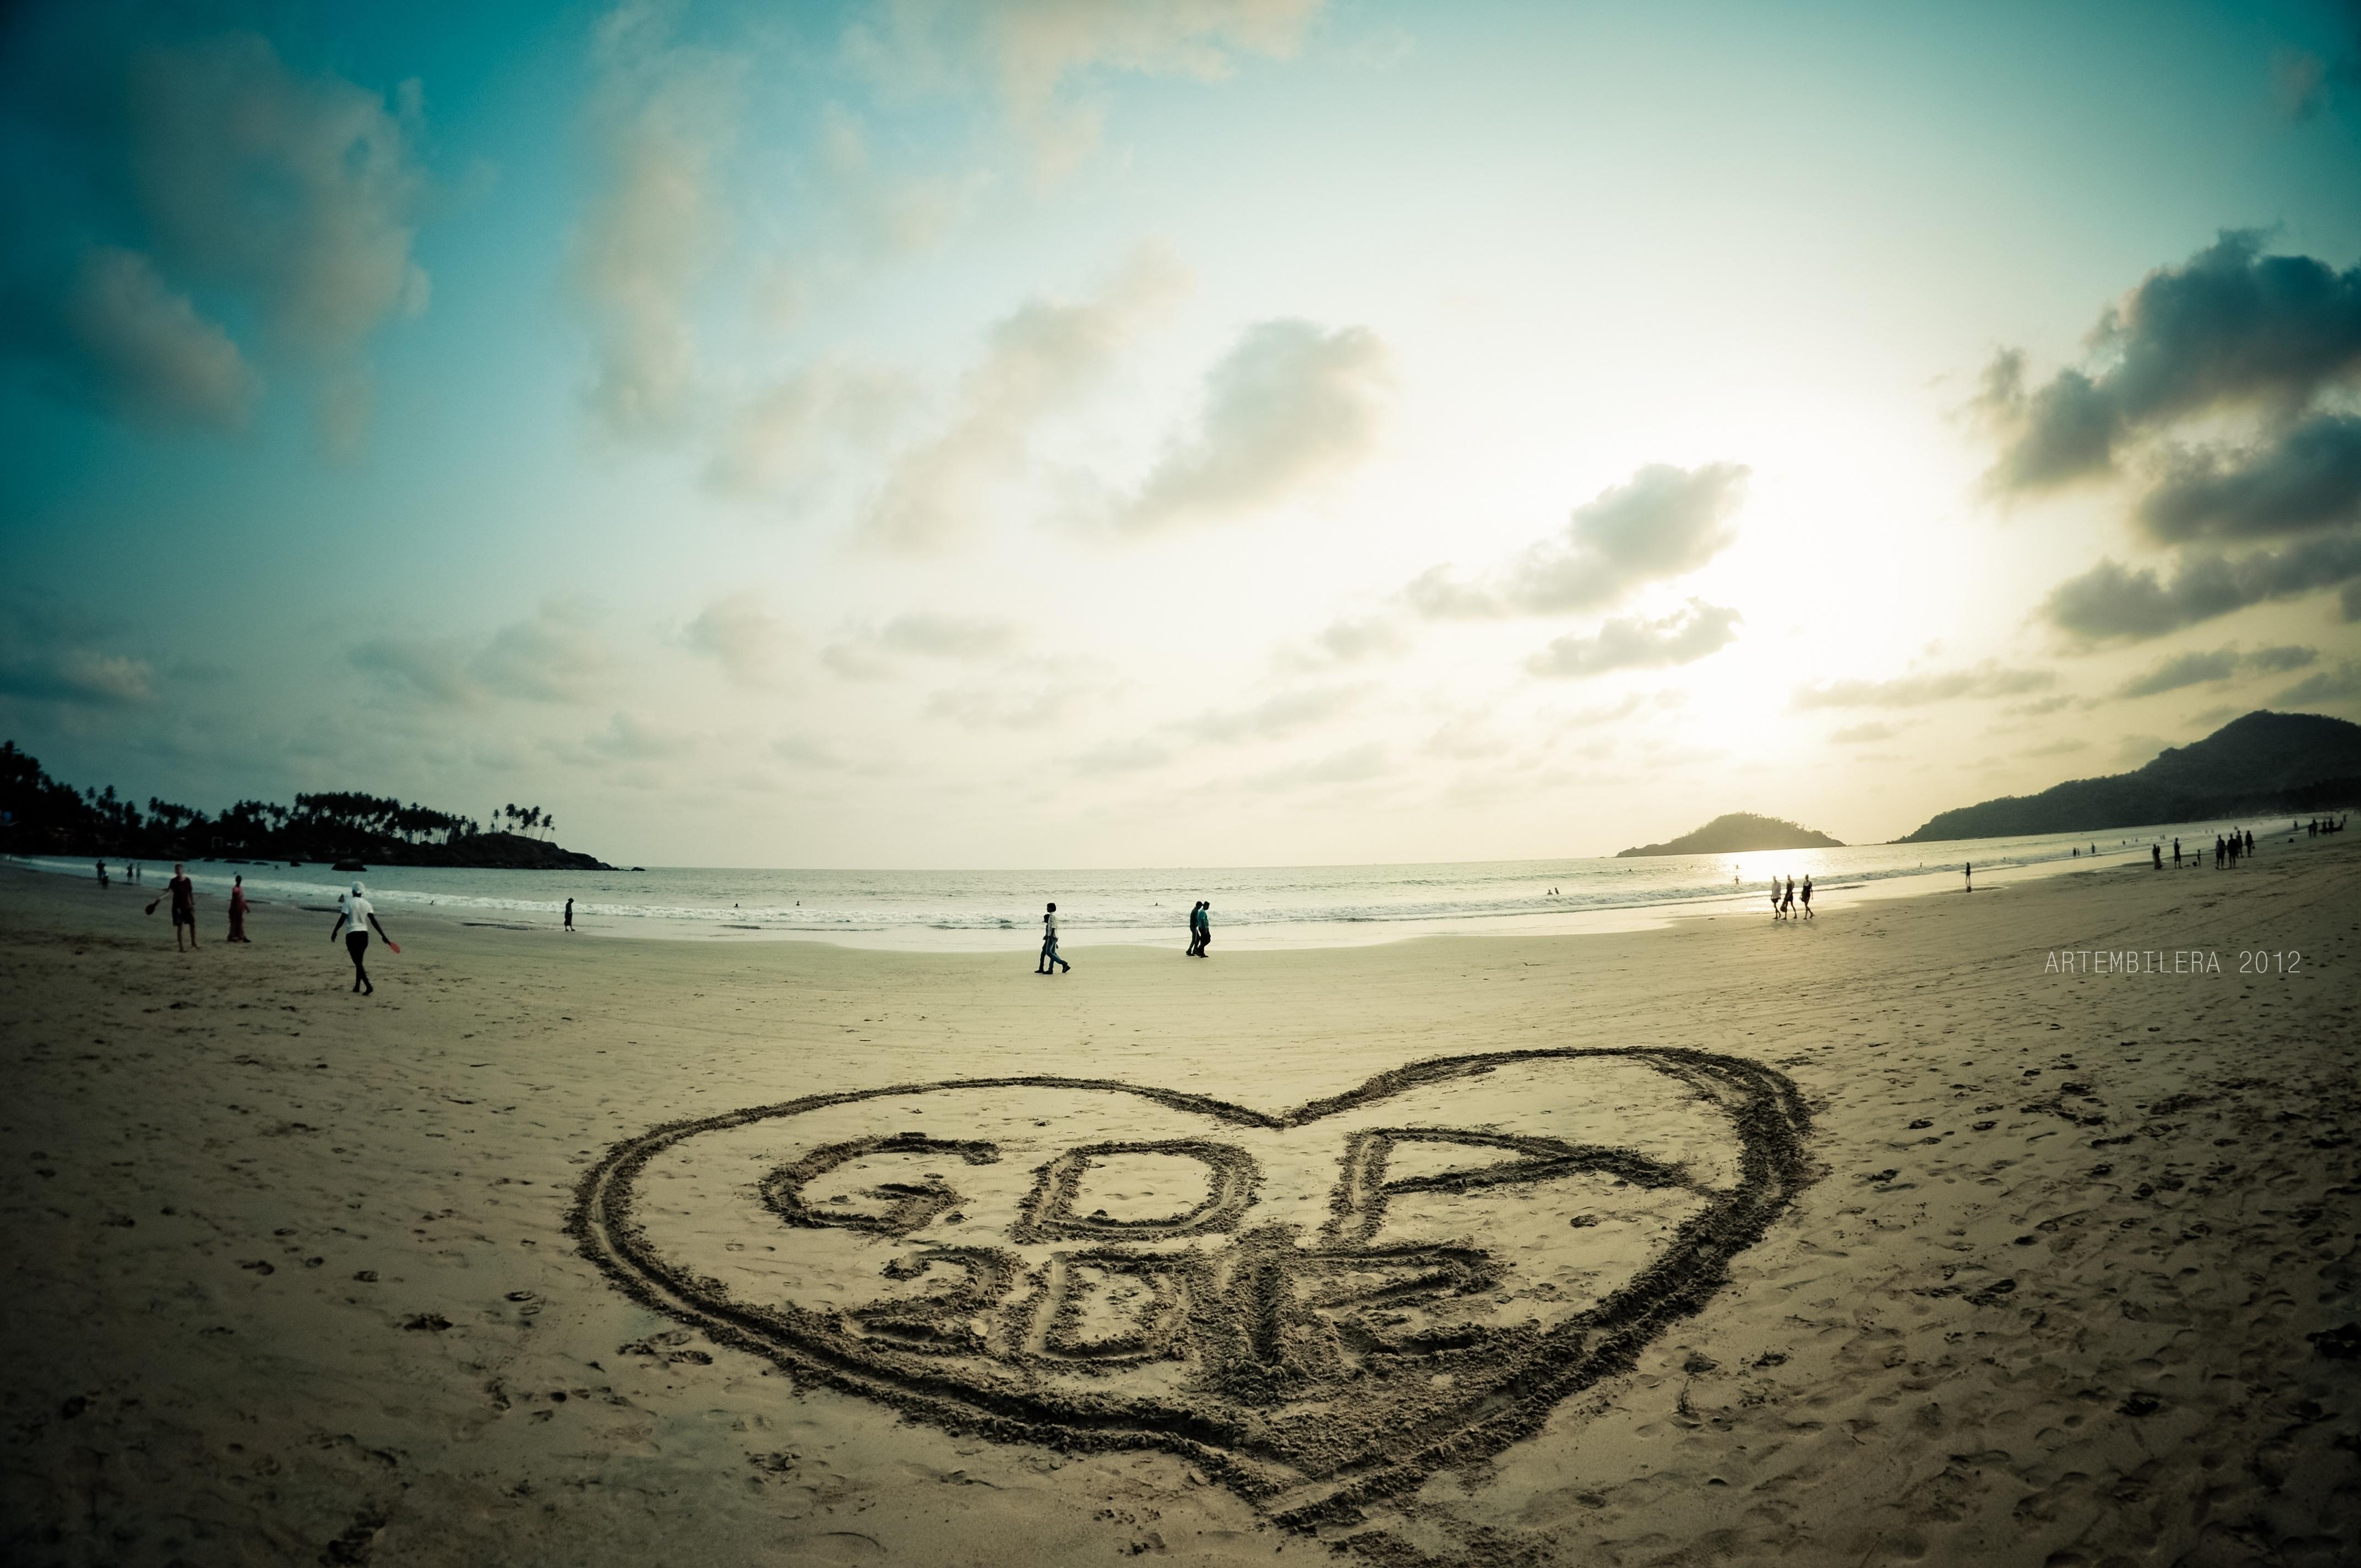 Drawing on the sand in Goa wallpaper and image